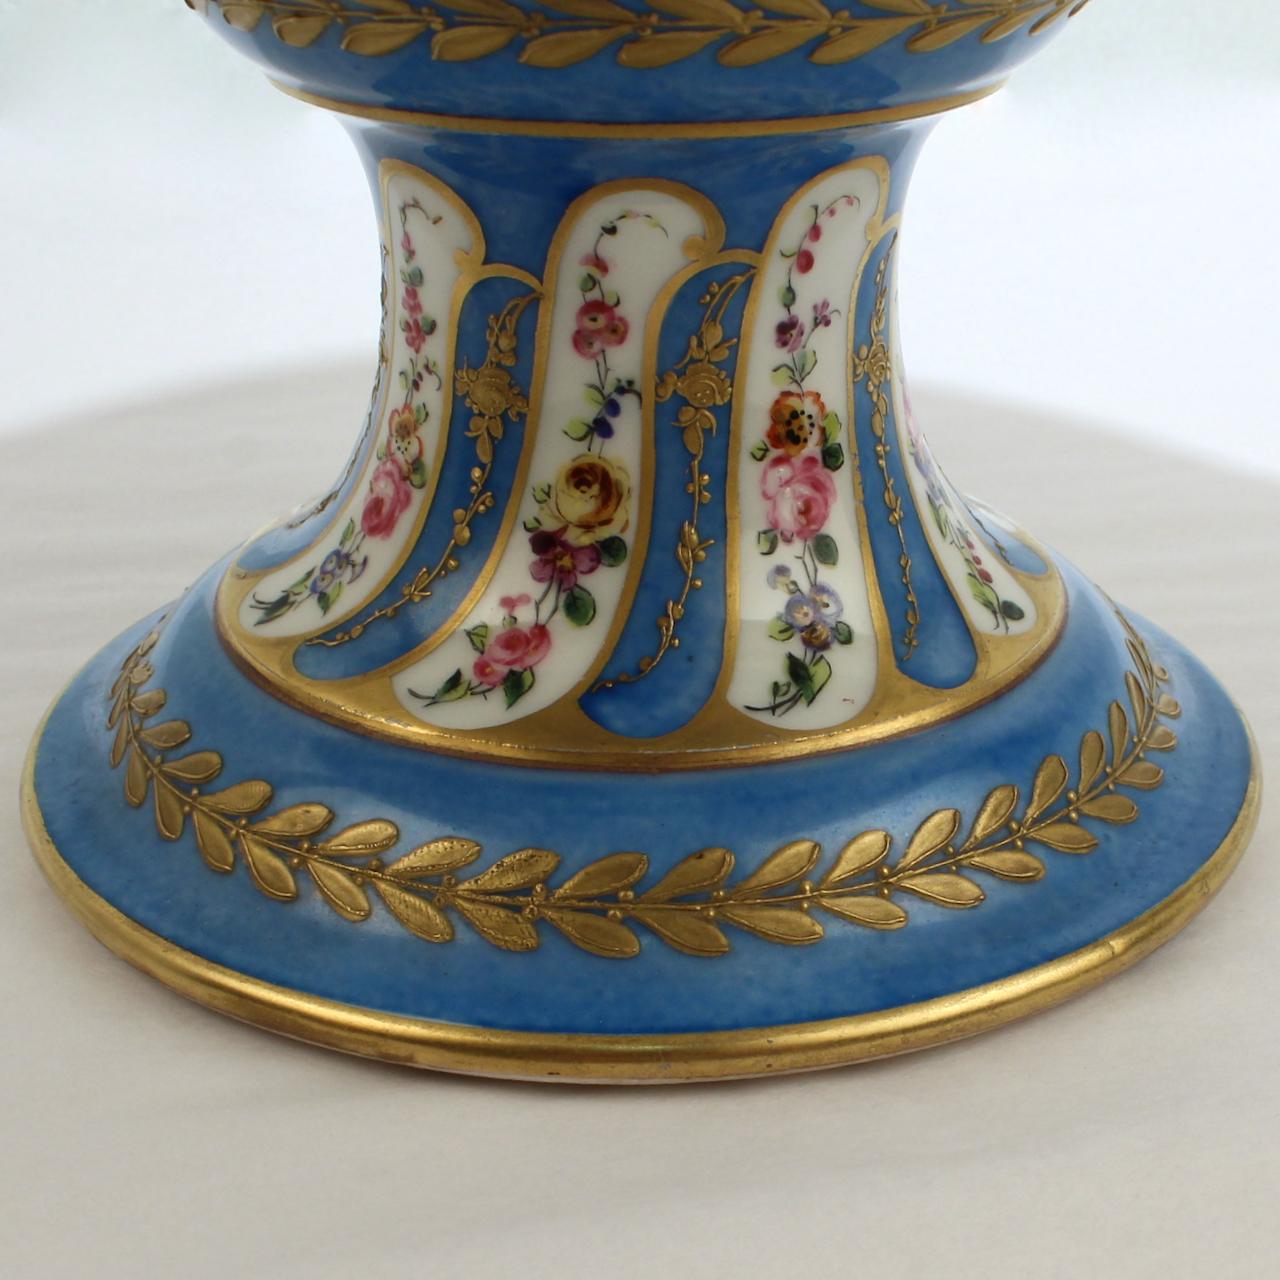 20th Century Antique Charles Pillivuyt & Co Celeste Bleu French Porcelain Compote or Tazza